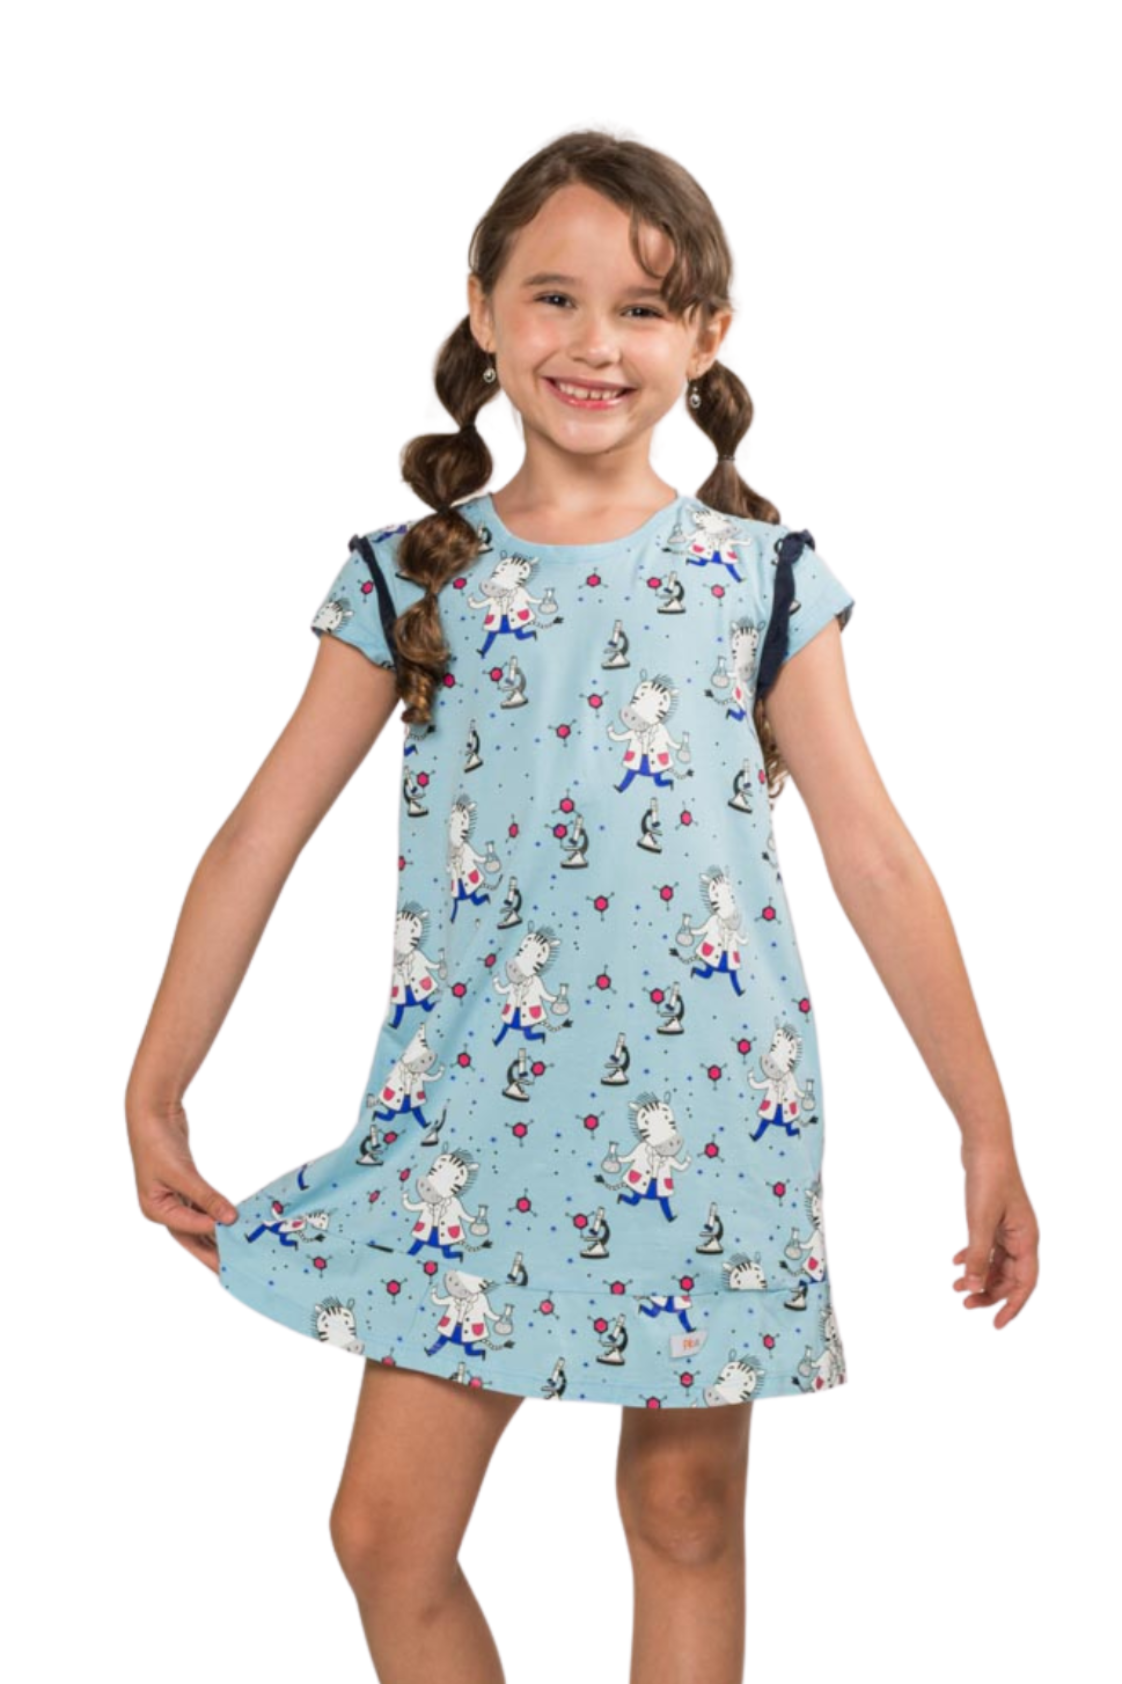 Scientific zebra dress for girls with pockets, in celeste and pink. STEM inspired, sustainable materials